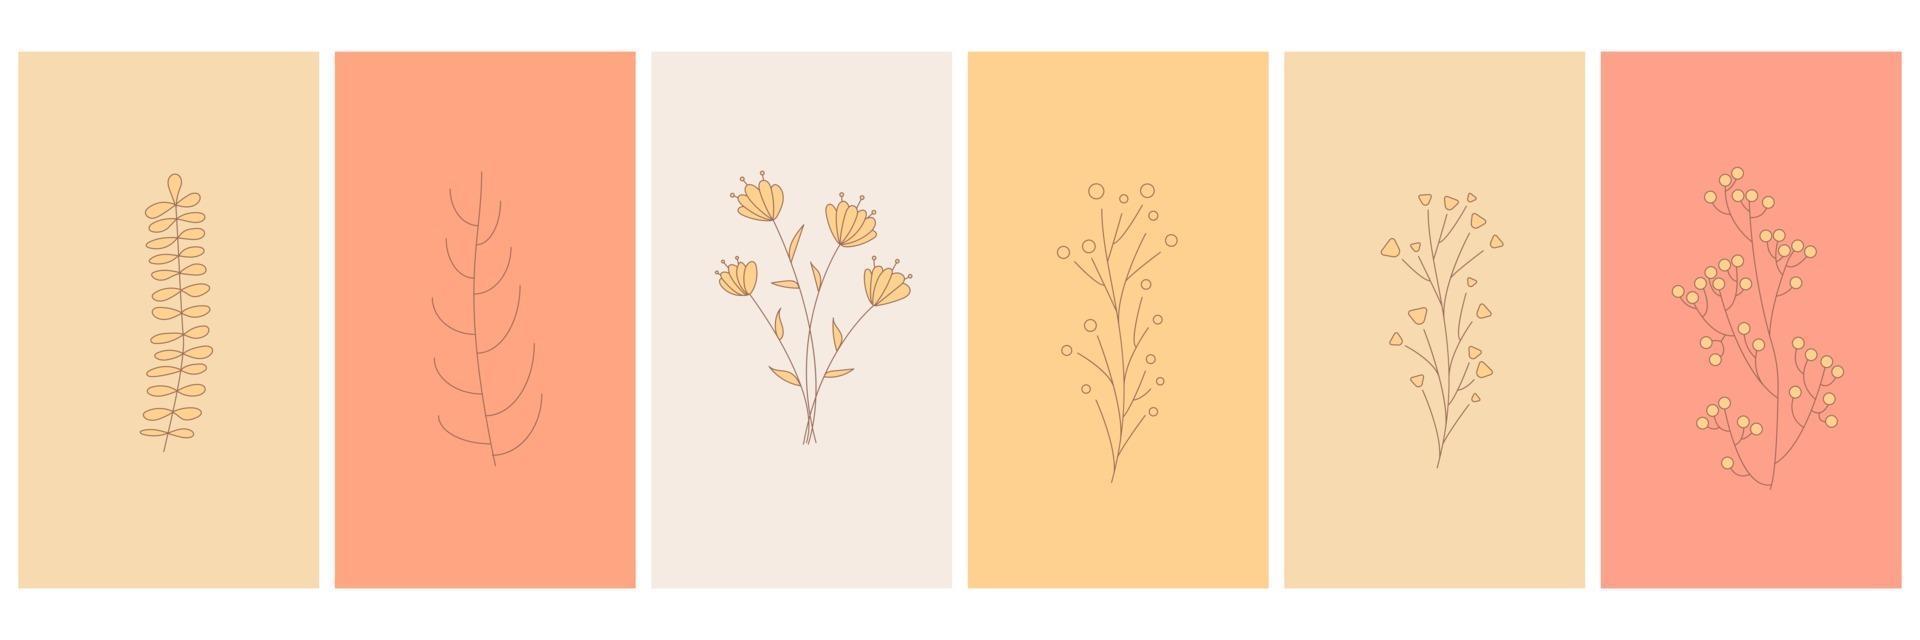 Abstract elements minimalistic simple floral elements leaves and flowers vector